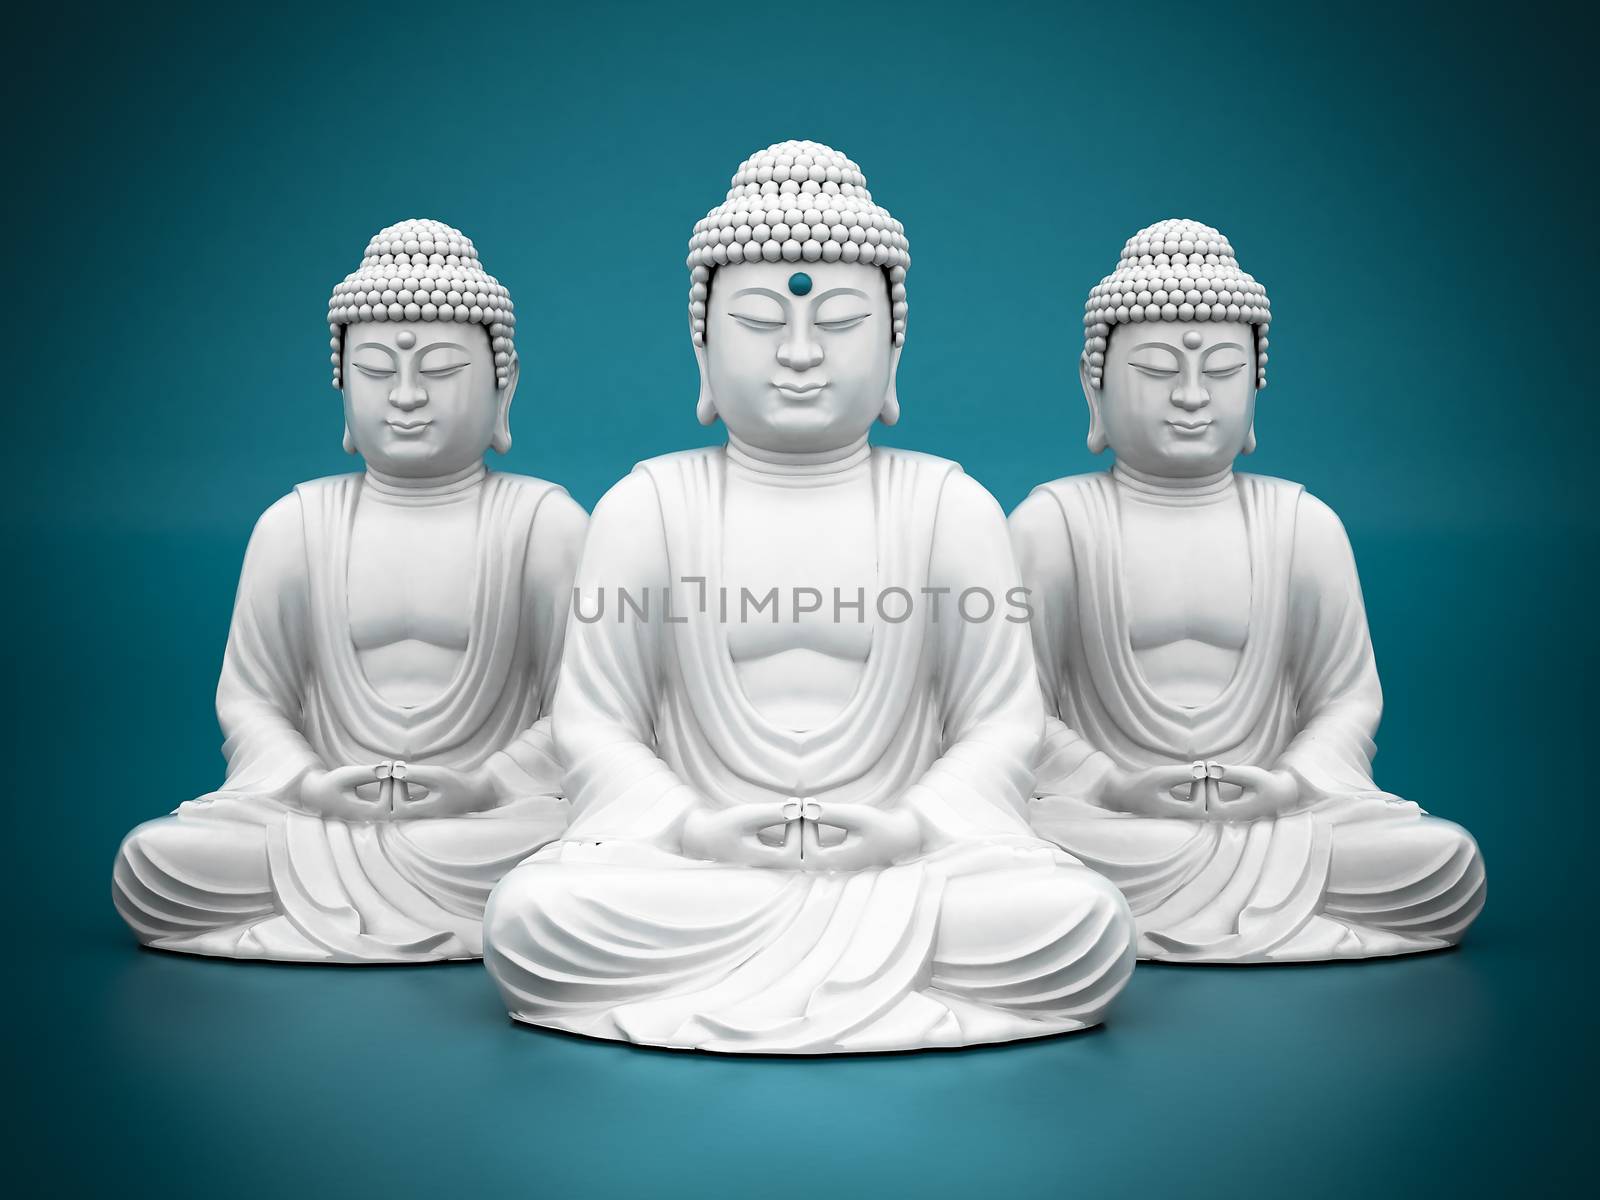 image of a white statue of Buddha on blue background